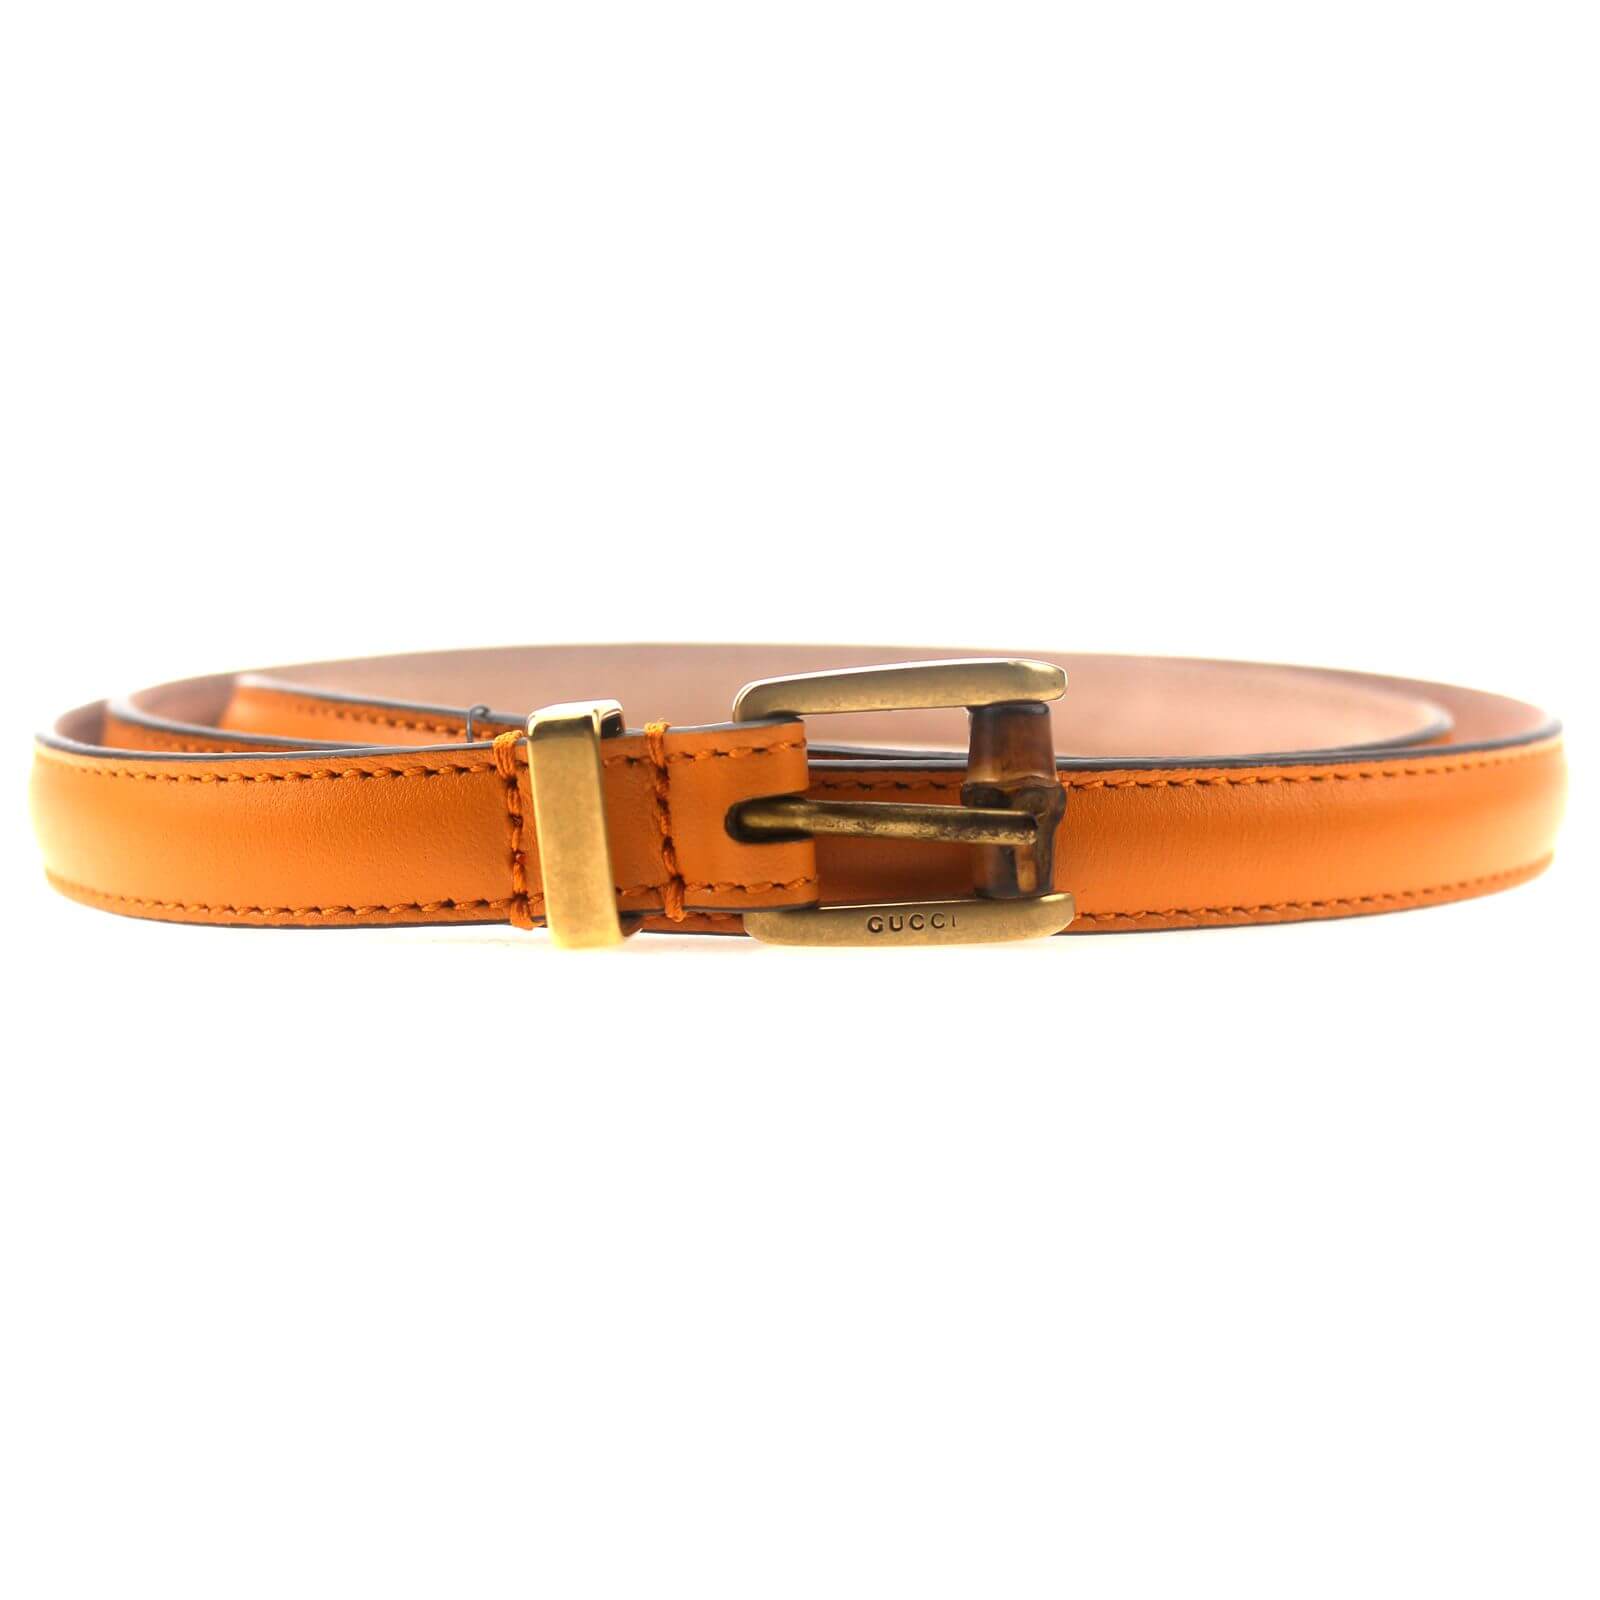 Gucci Belts for Women | Bamboo Buckle Leather OR 90B | BagBuyBuy